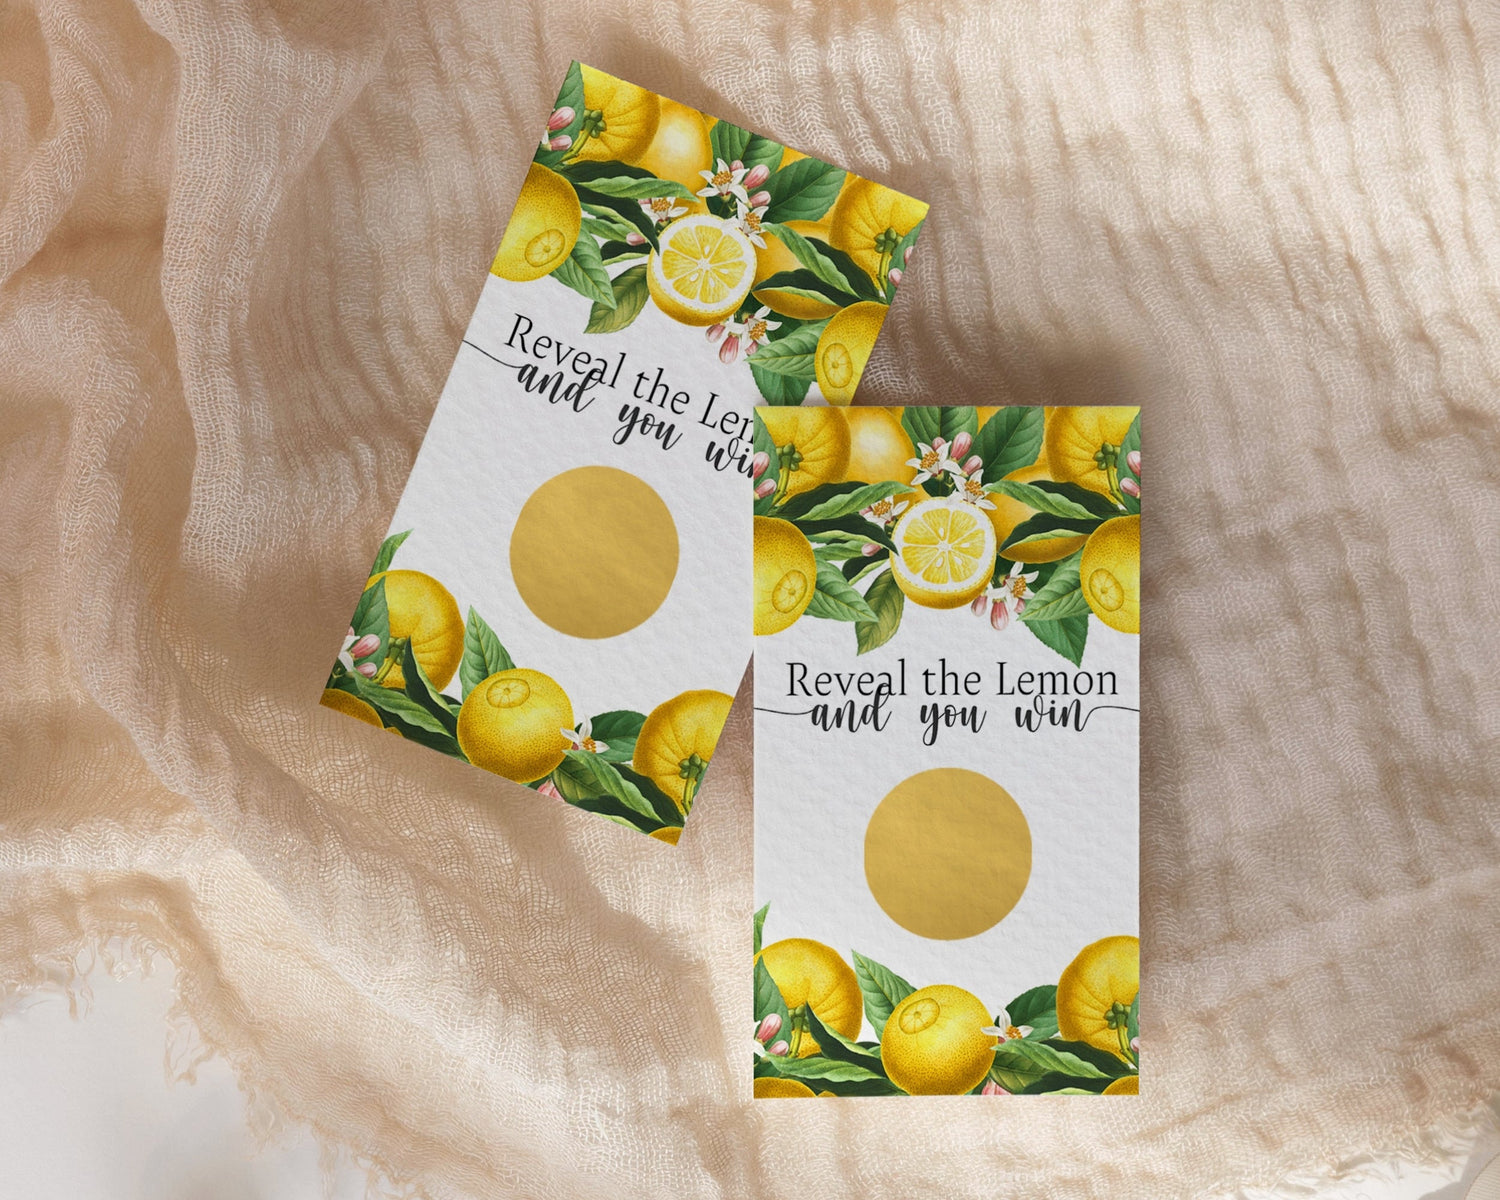 Perfect for bridal showers, baby announcements, or garden parties, these cards offer a delightful mix of suspense and elegance. Scratch to reveal surprises that will bloom into lasting memories!